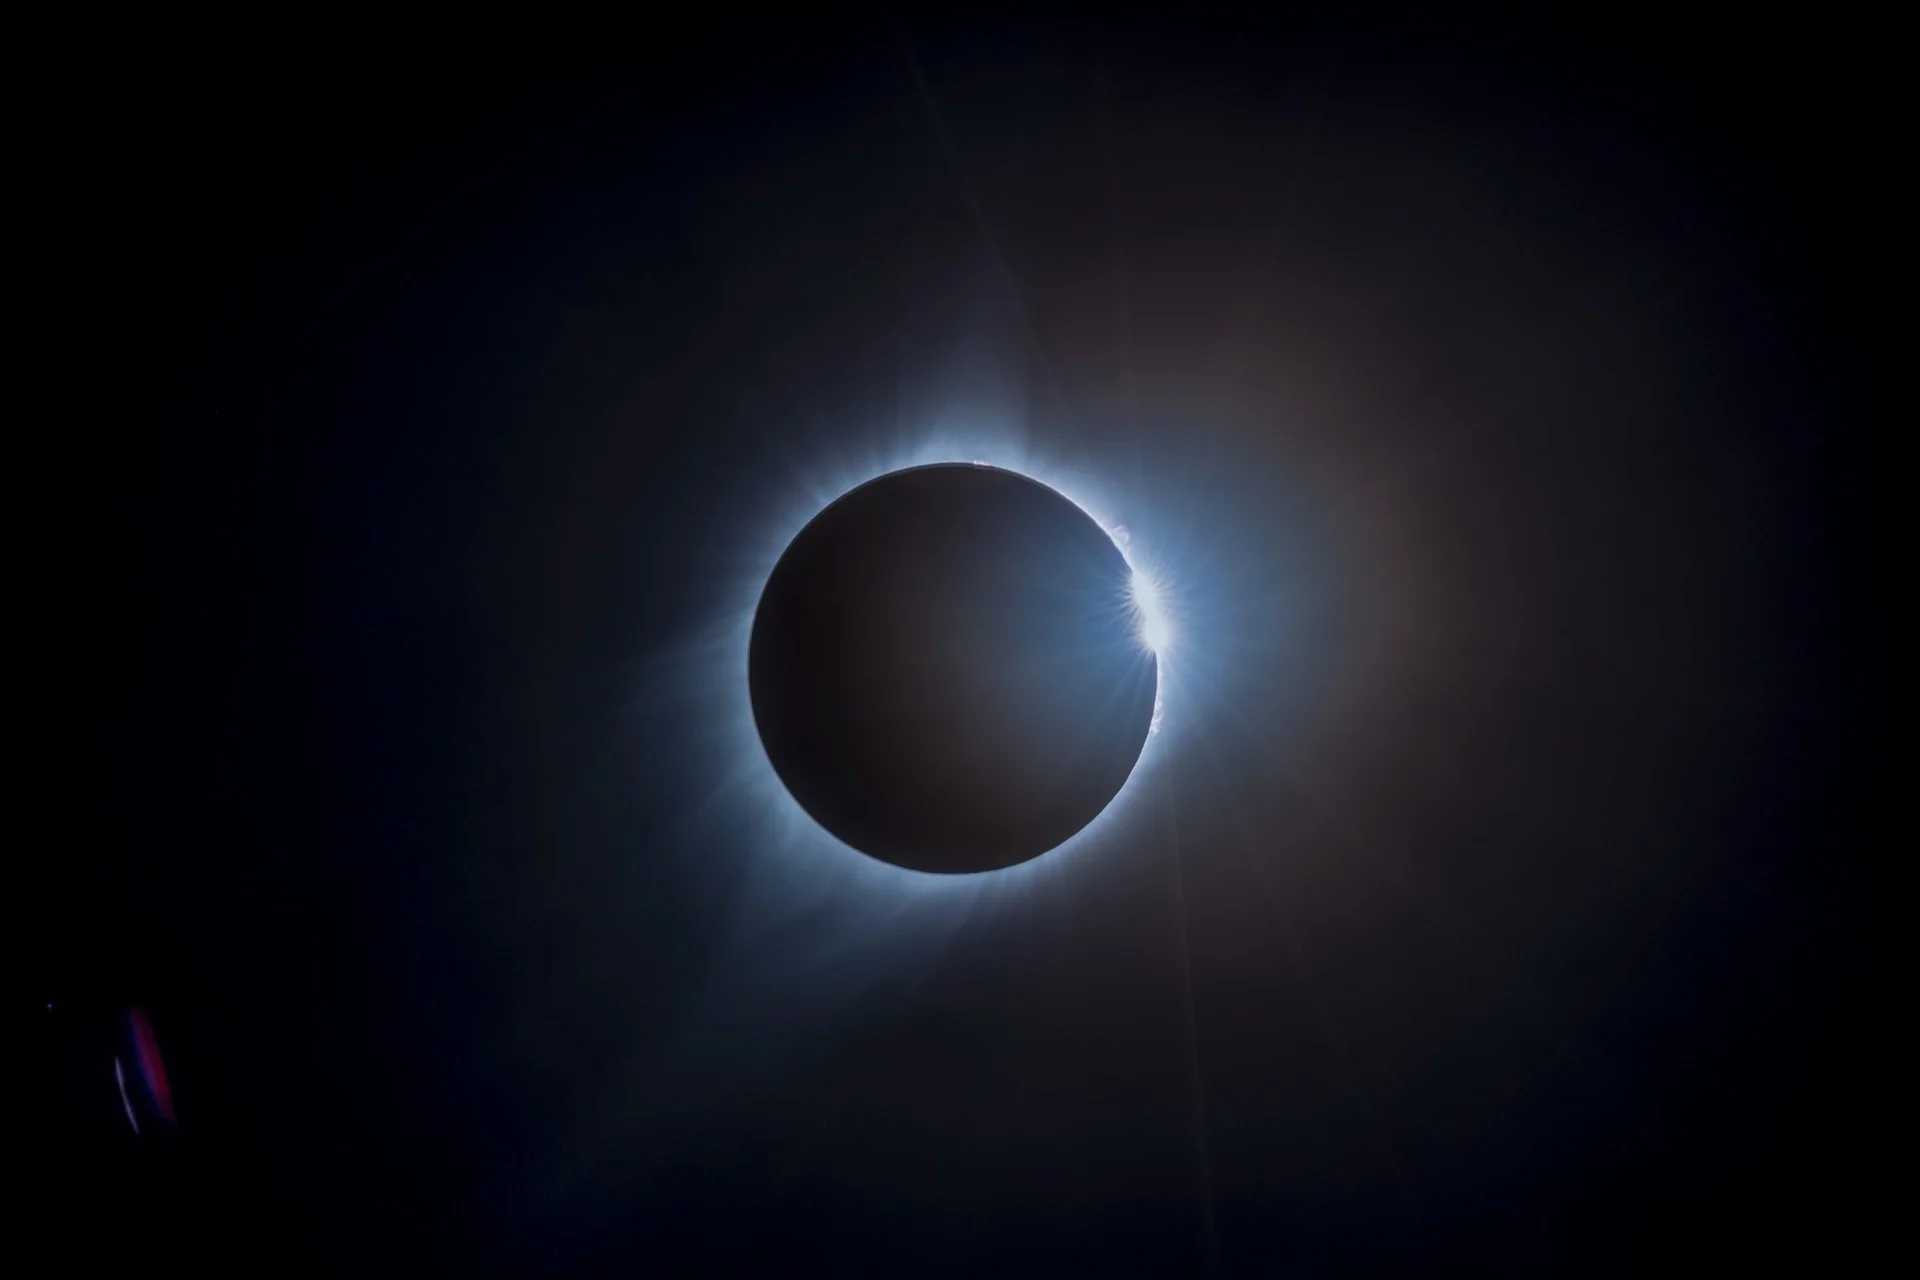 Strange things may happen during the eclipse, and NASA wants you to document it